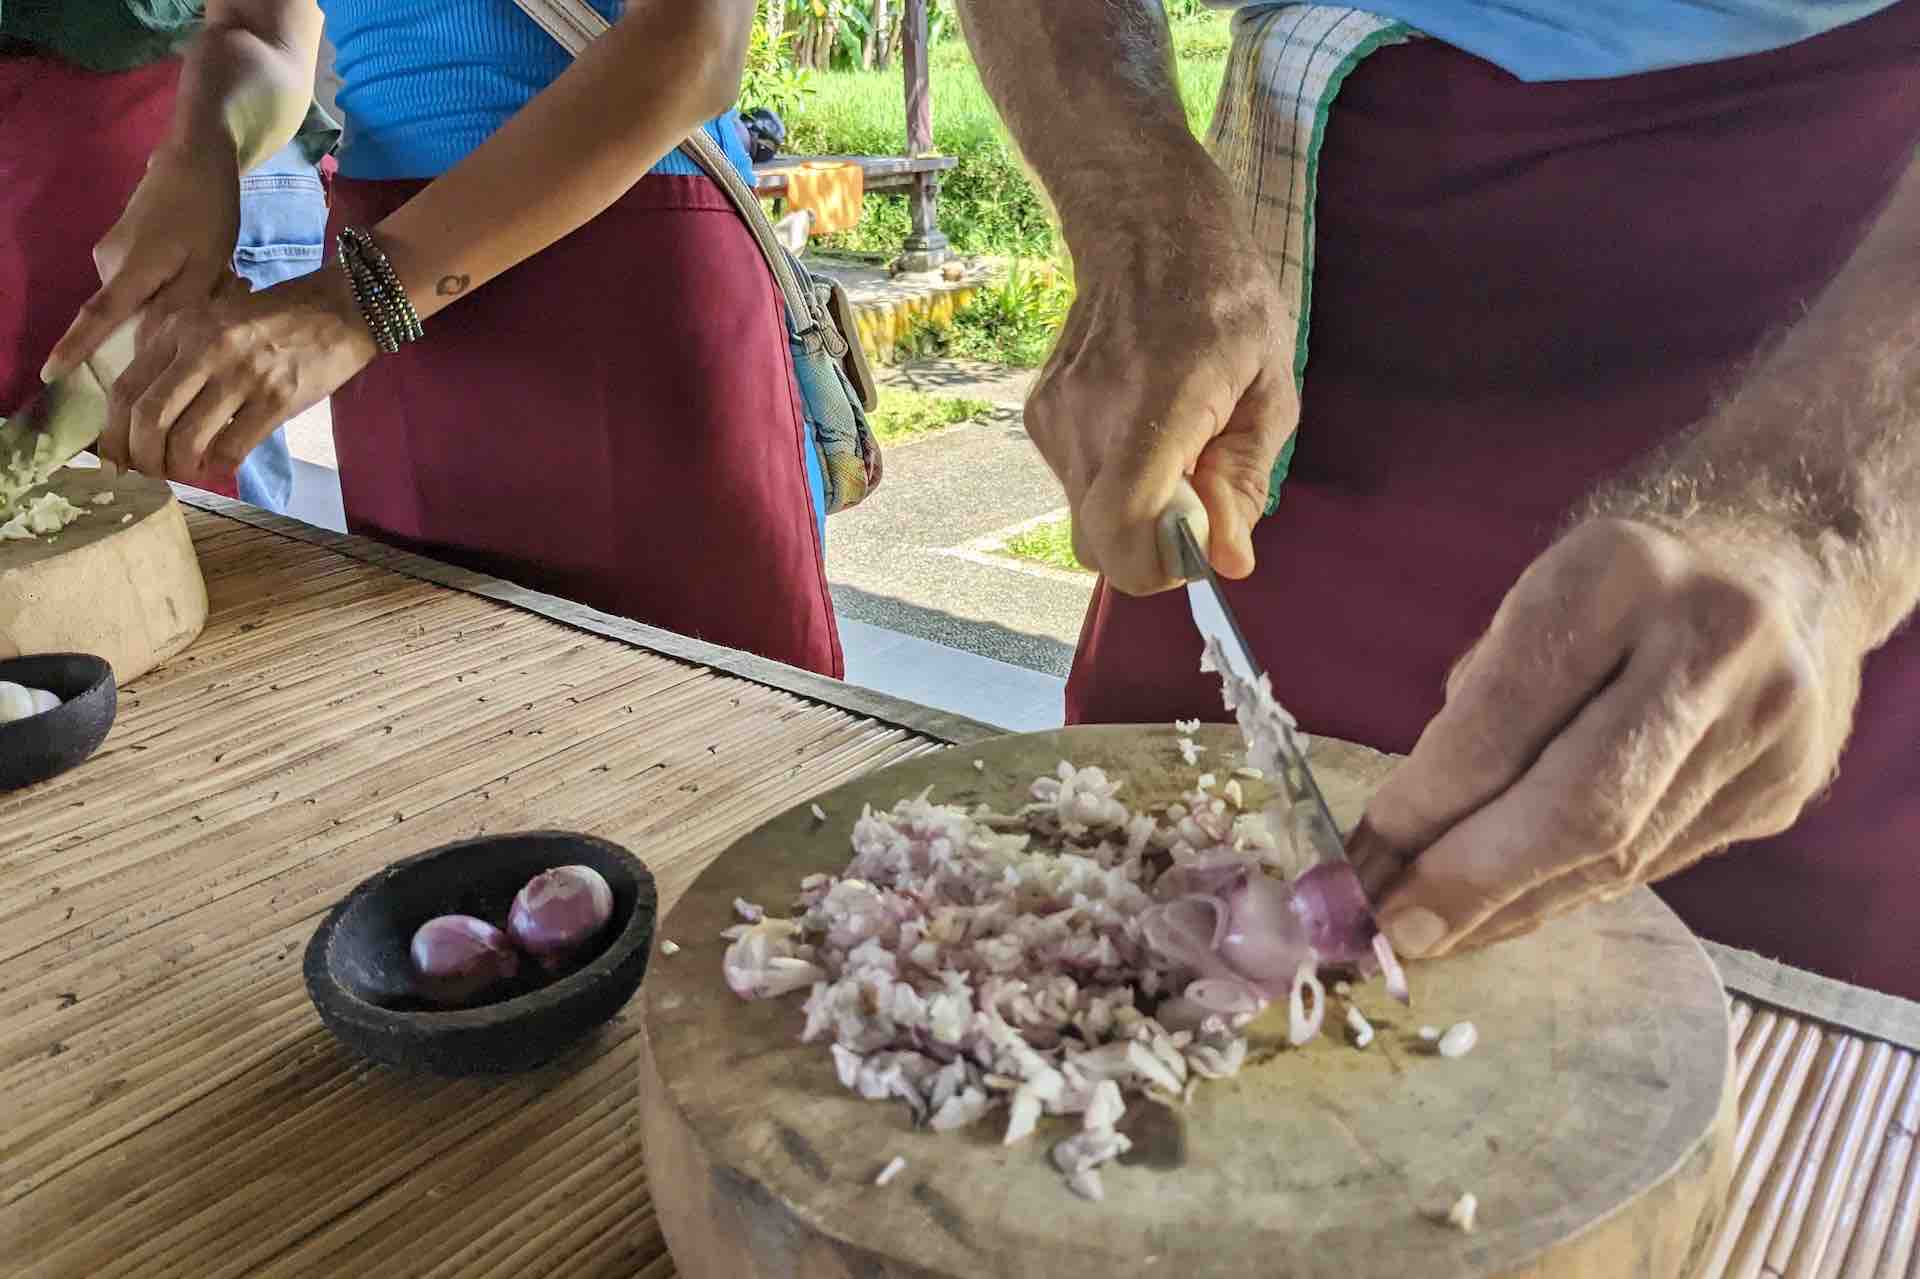 Bali cooking class guests cutting ingredients2